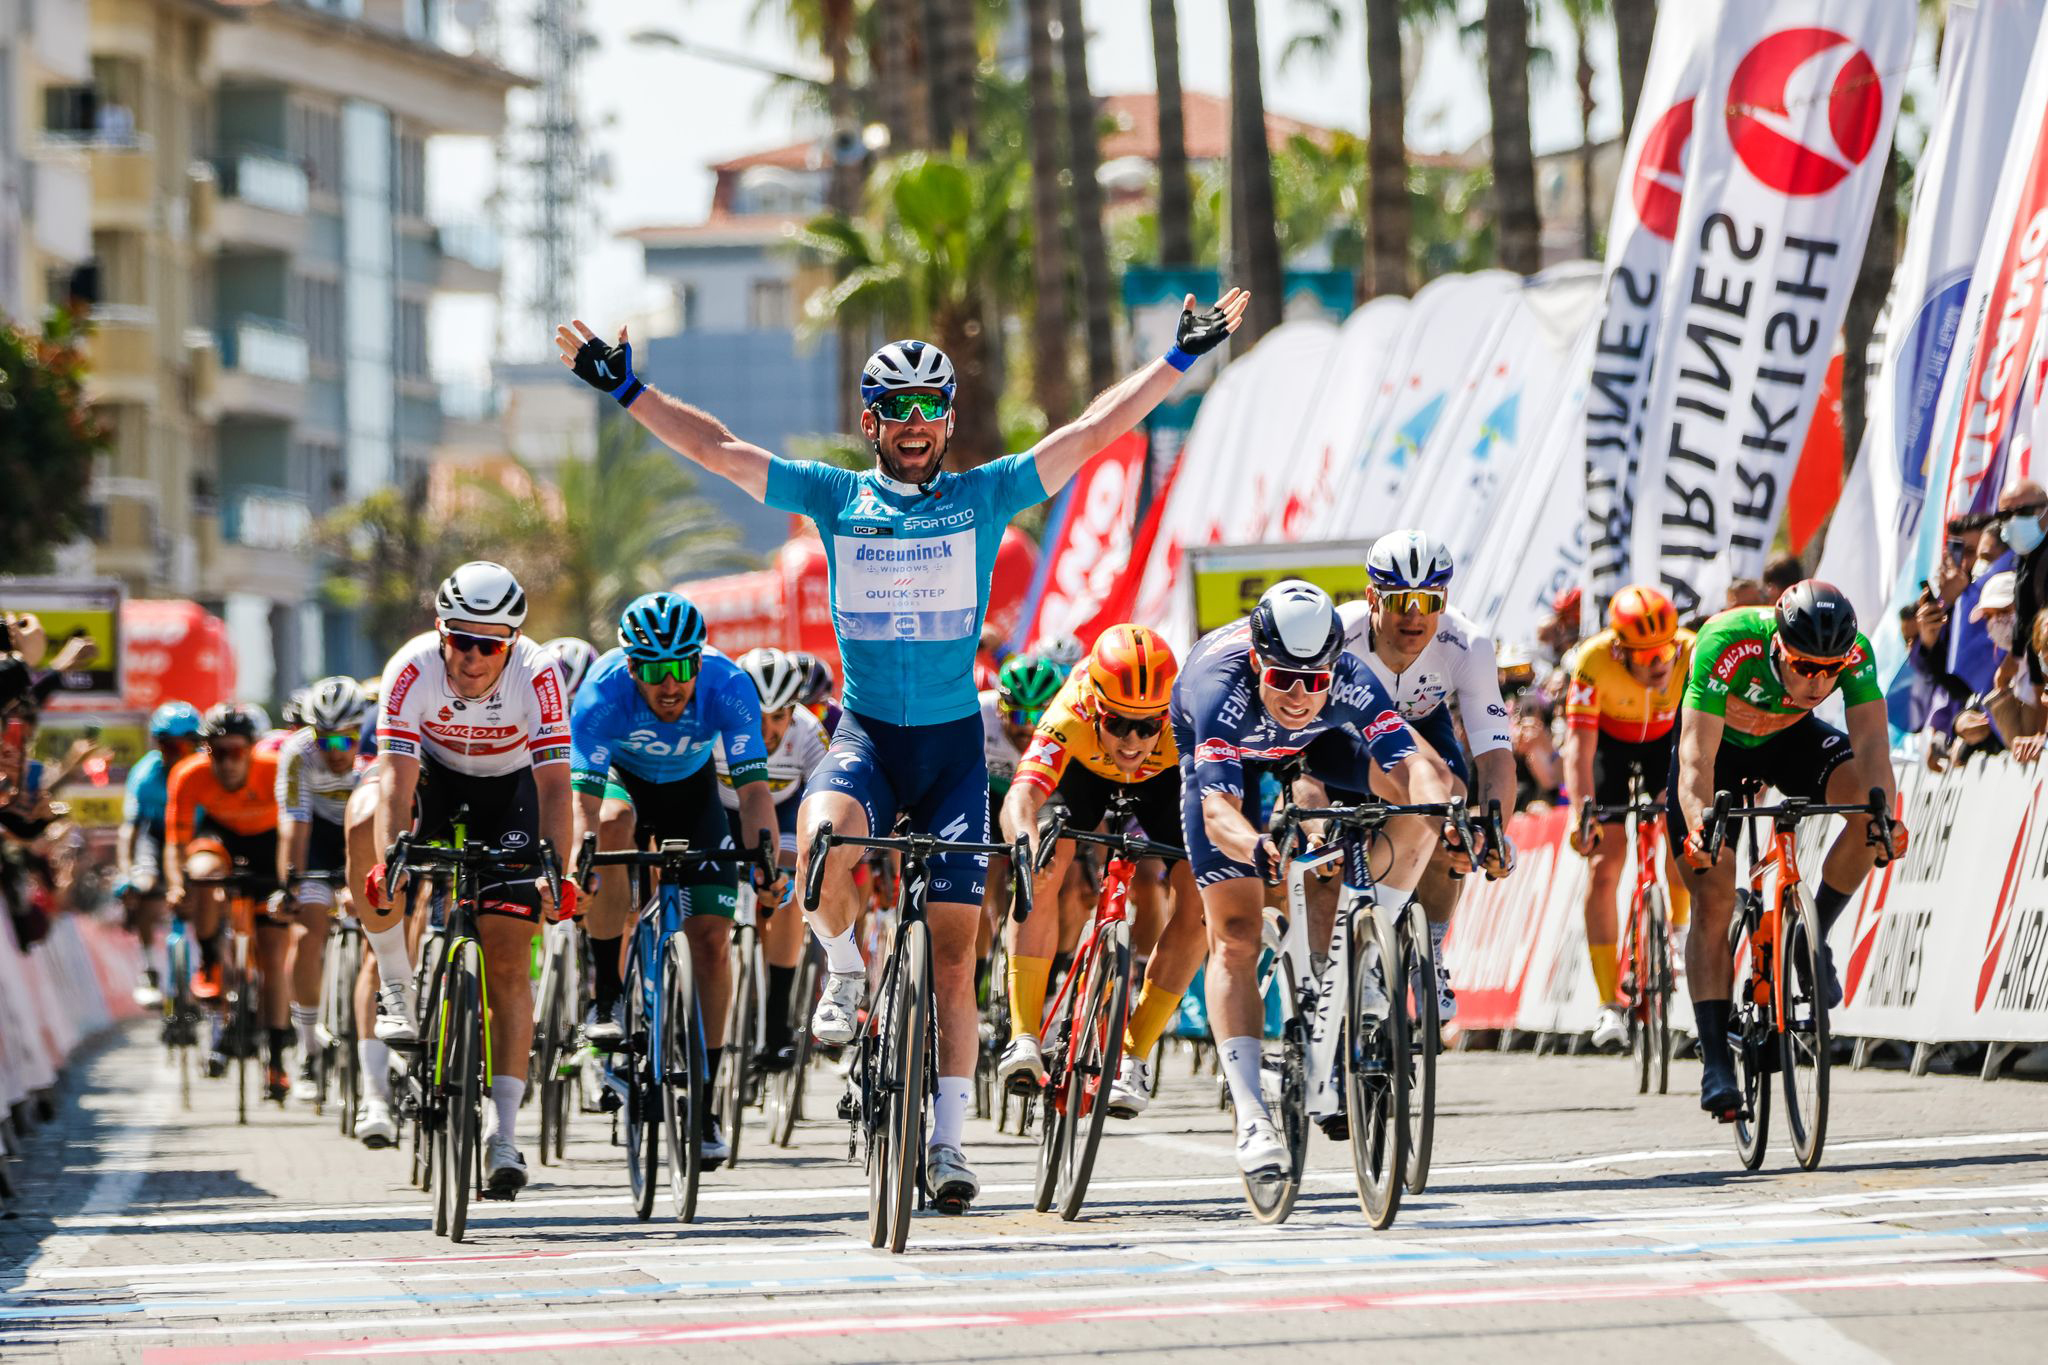 The world's largest bicycle racing series is in Turkey!